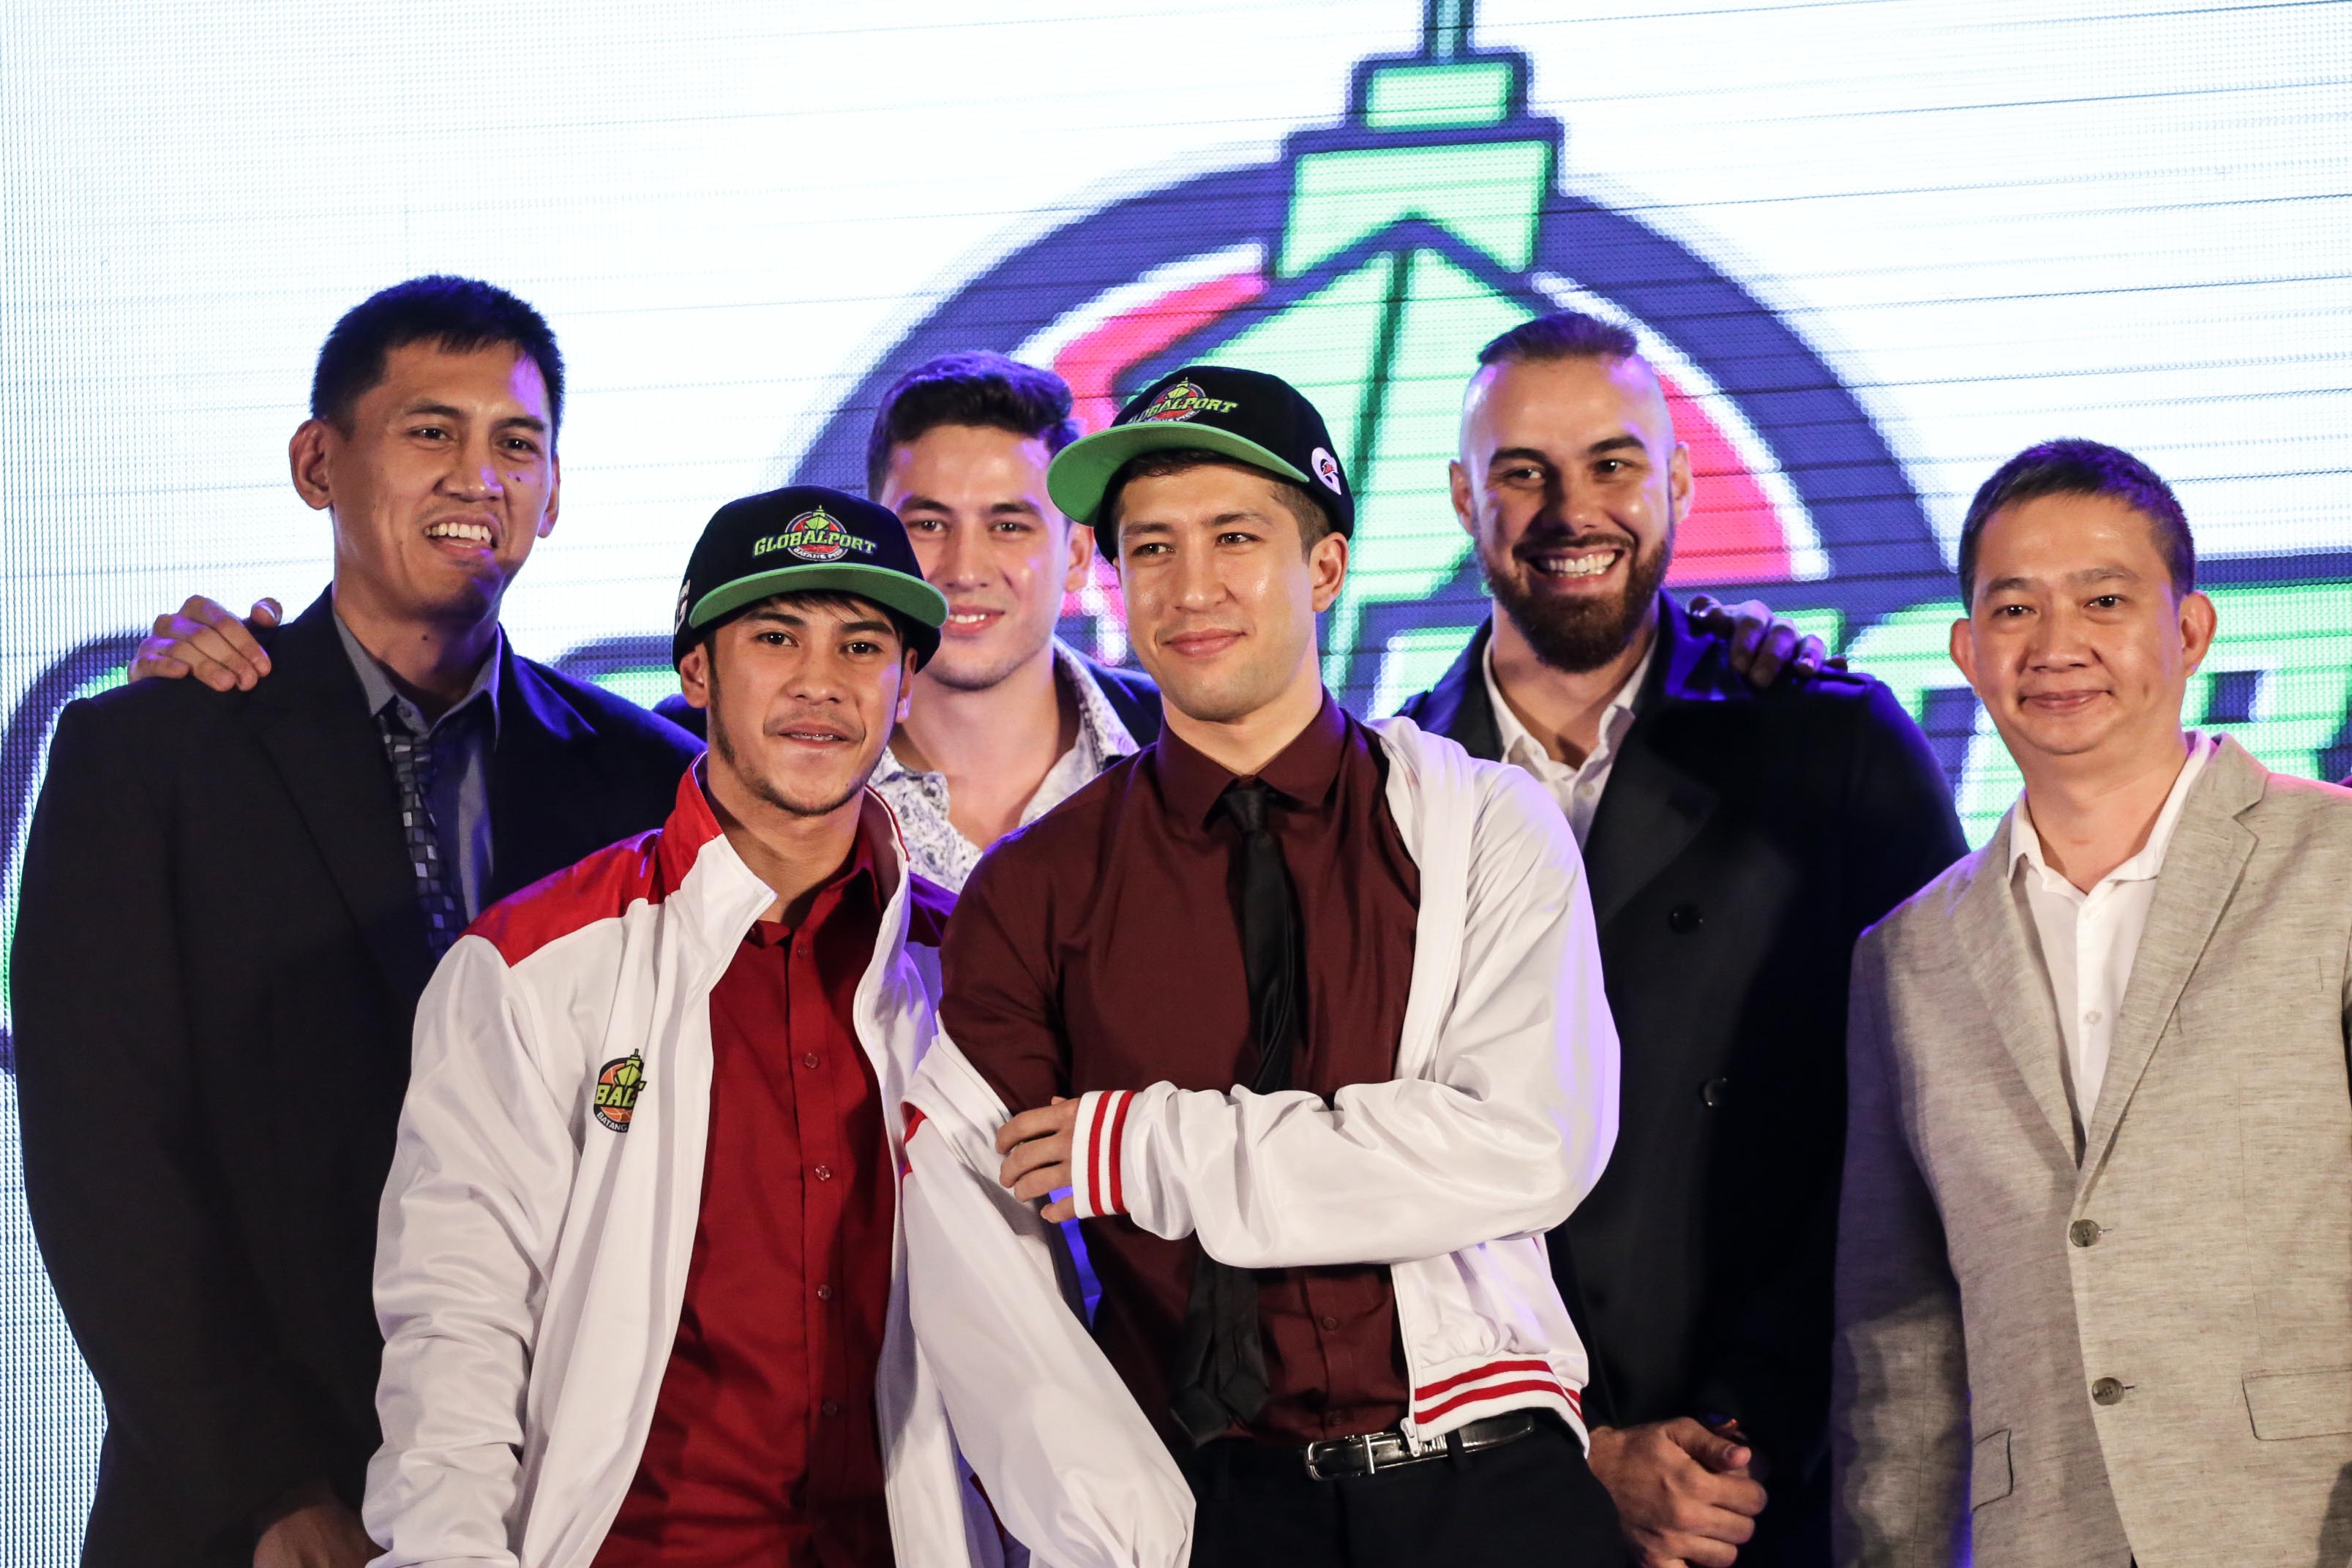 Roi Sumang on stage in the 2015 PBA Rookie Draft. Photo by Tristan Tamayo/INQUIRER.net